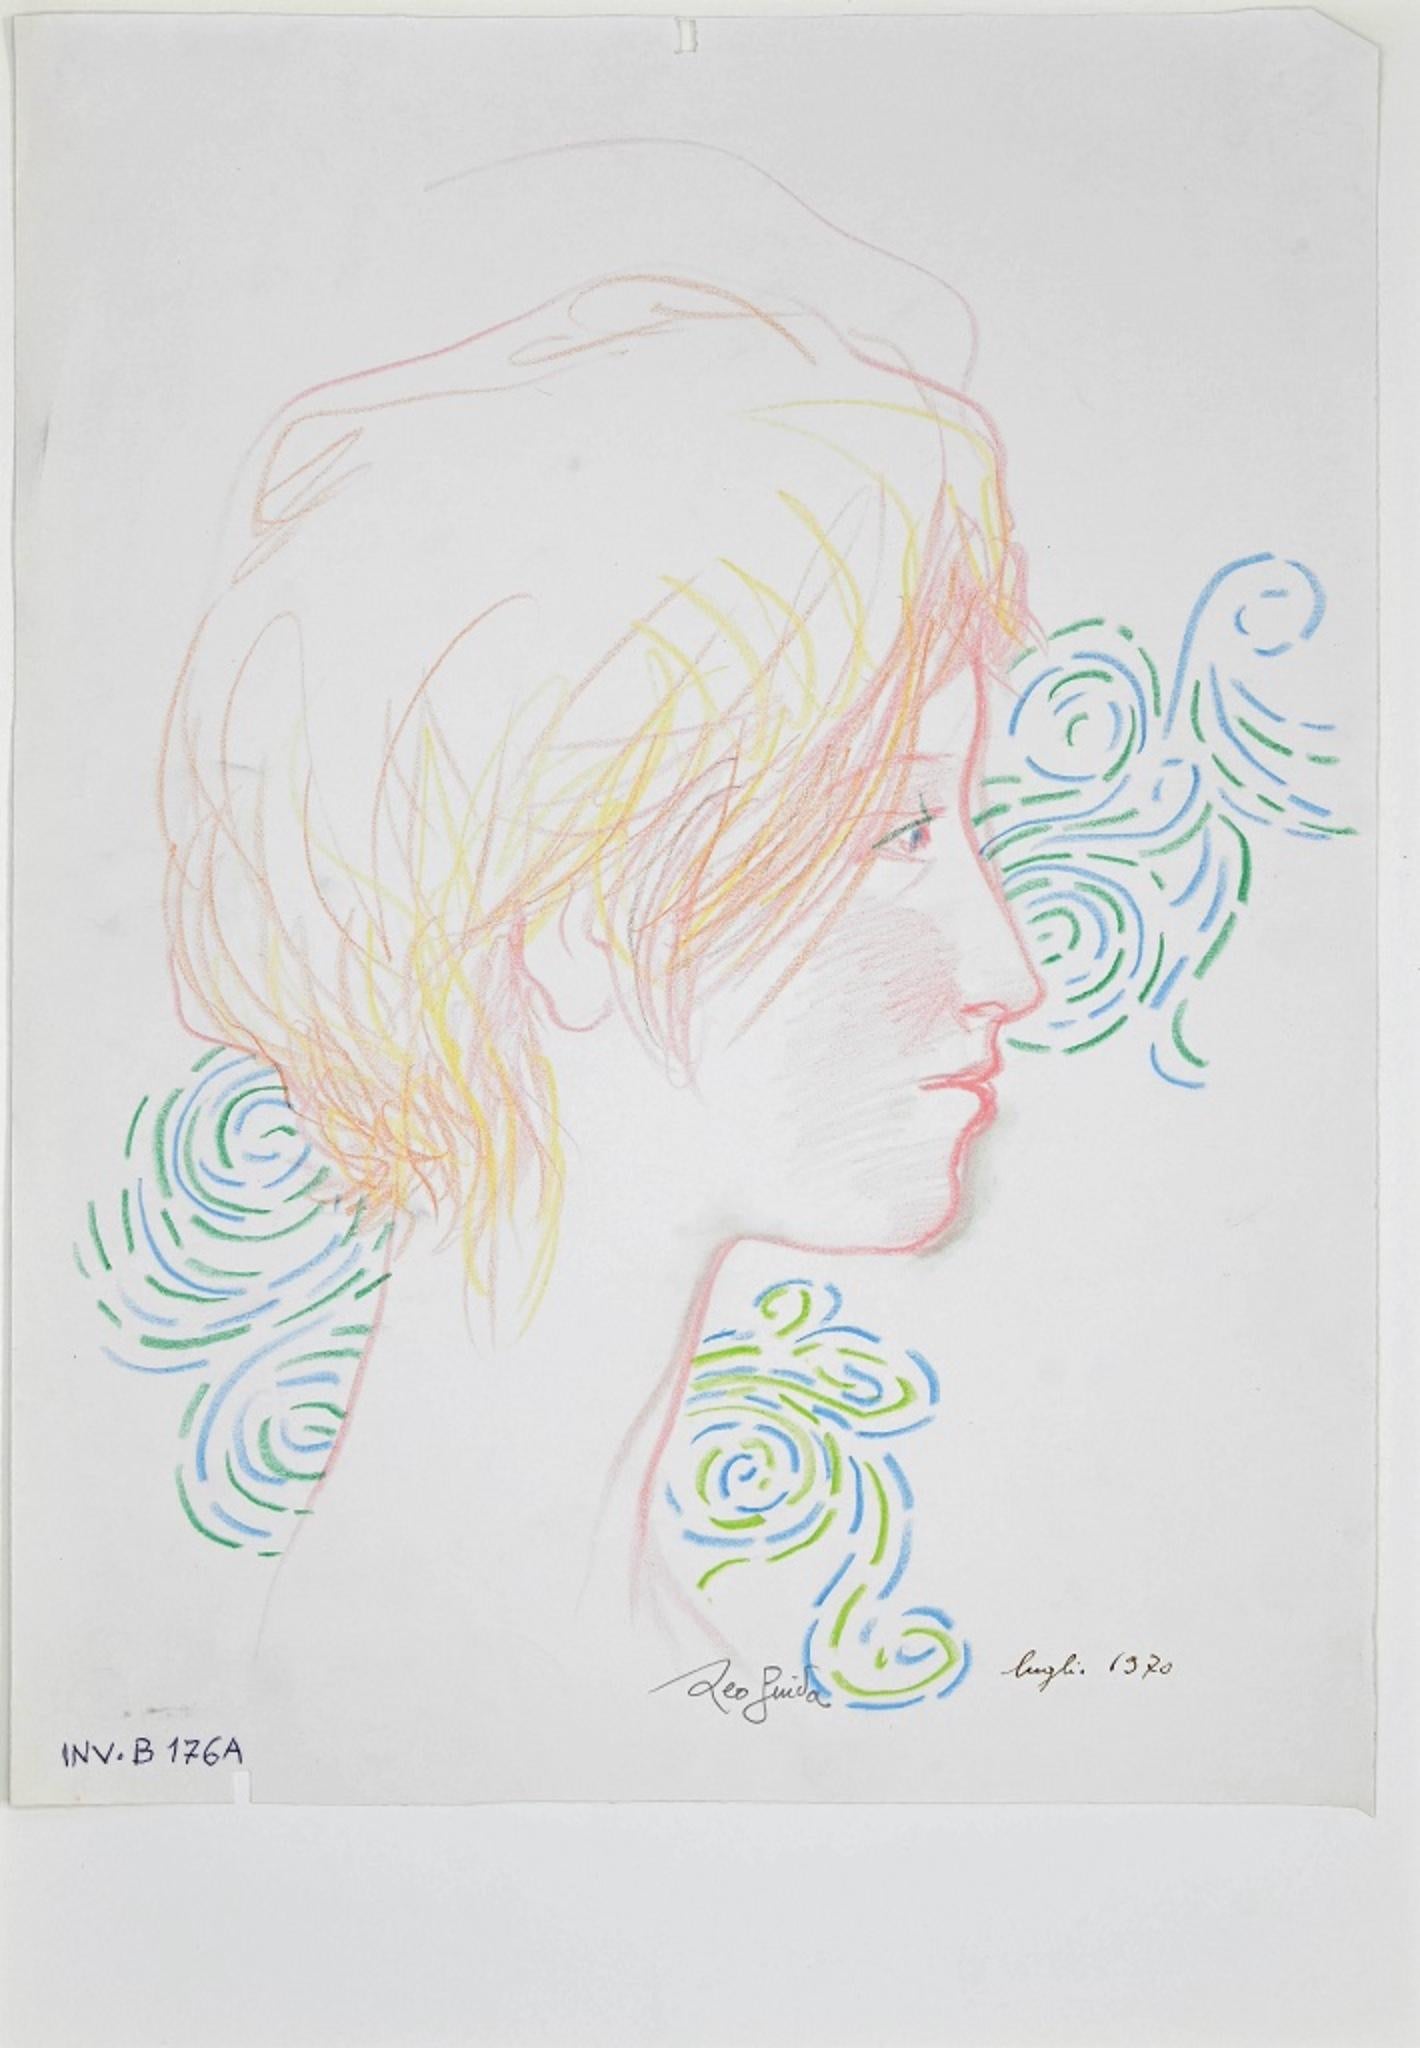 Female Portrait - Pencil and Ink by Leo Guida - 1970